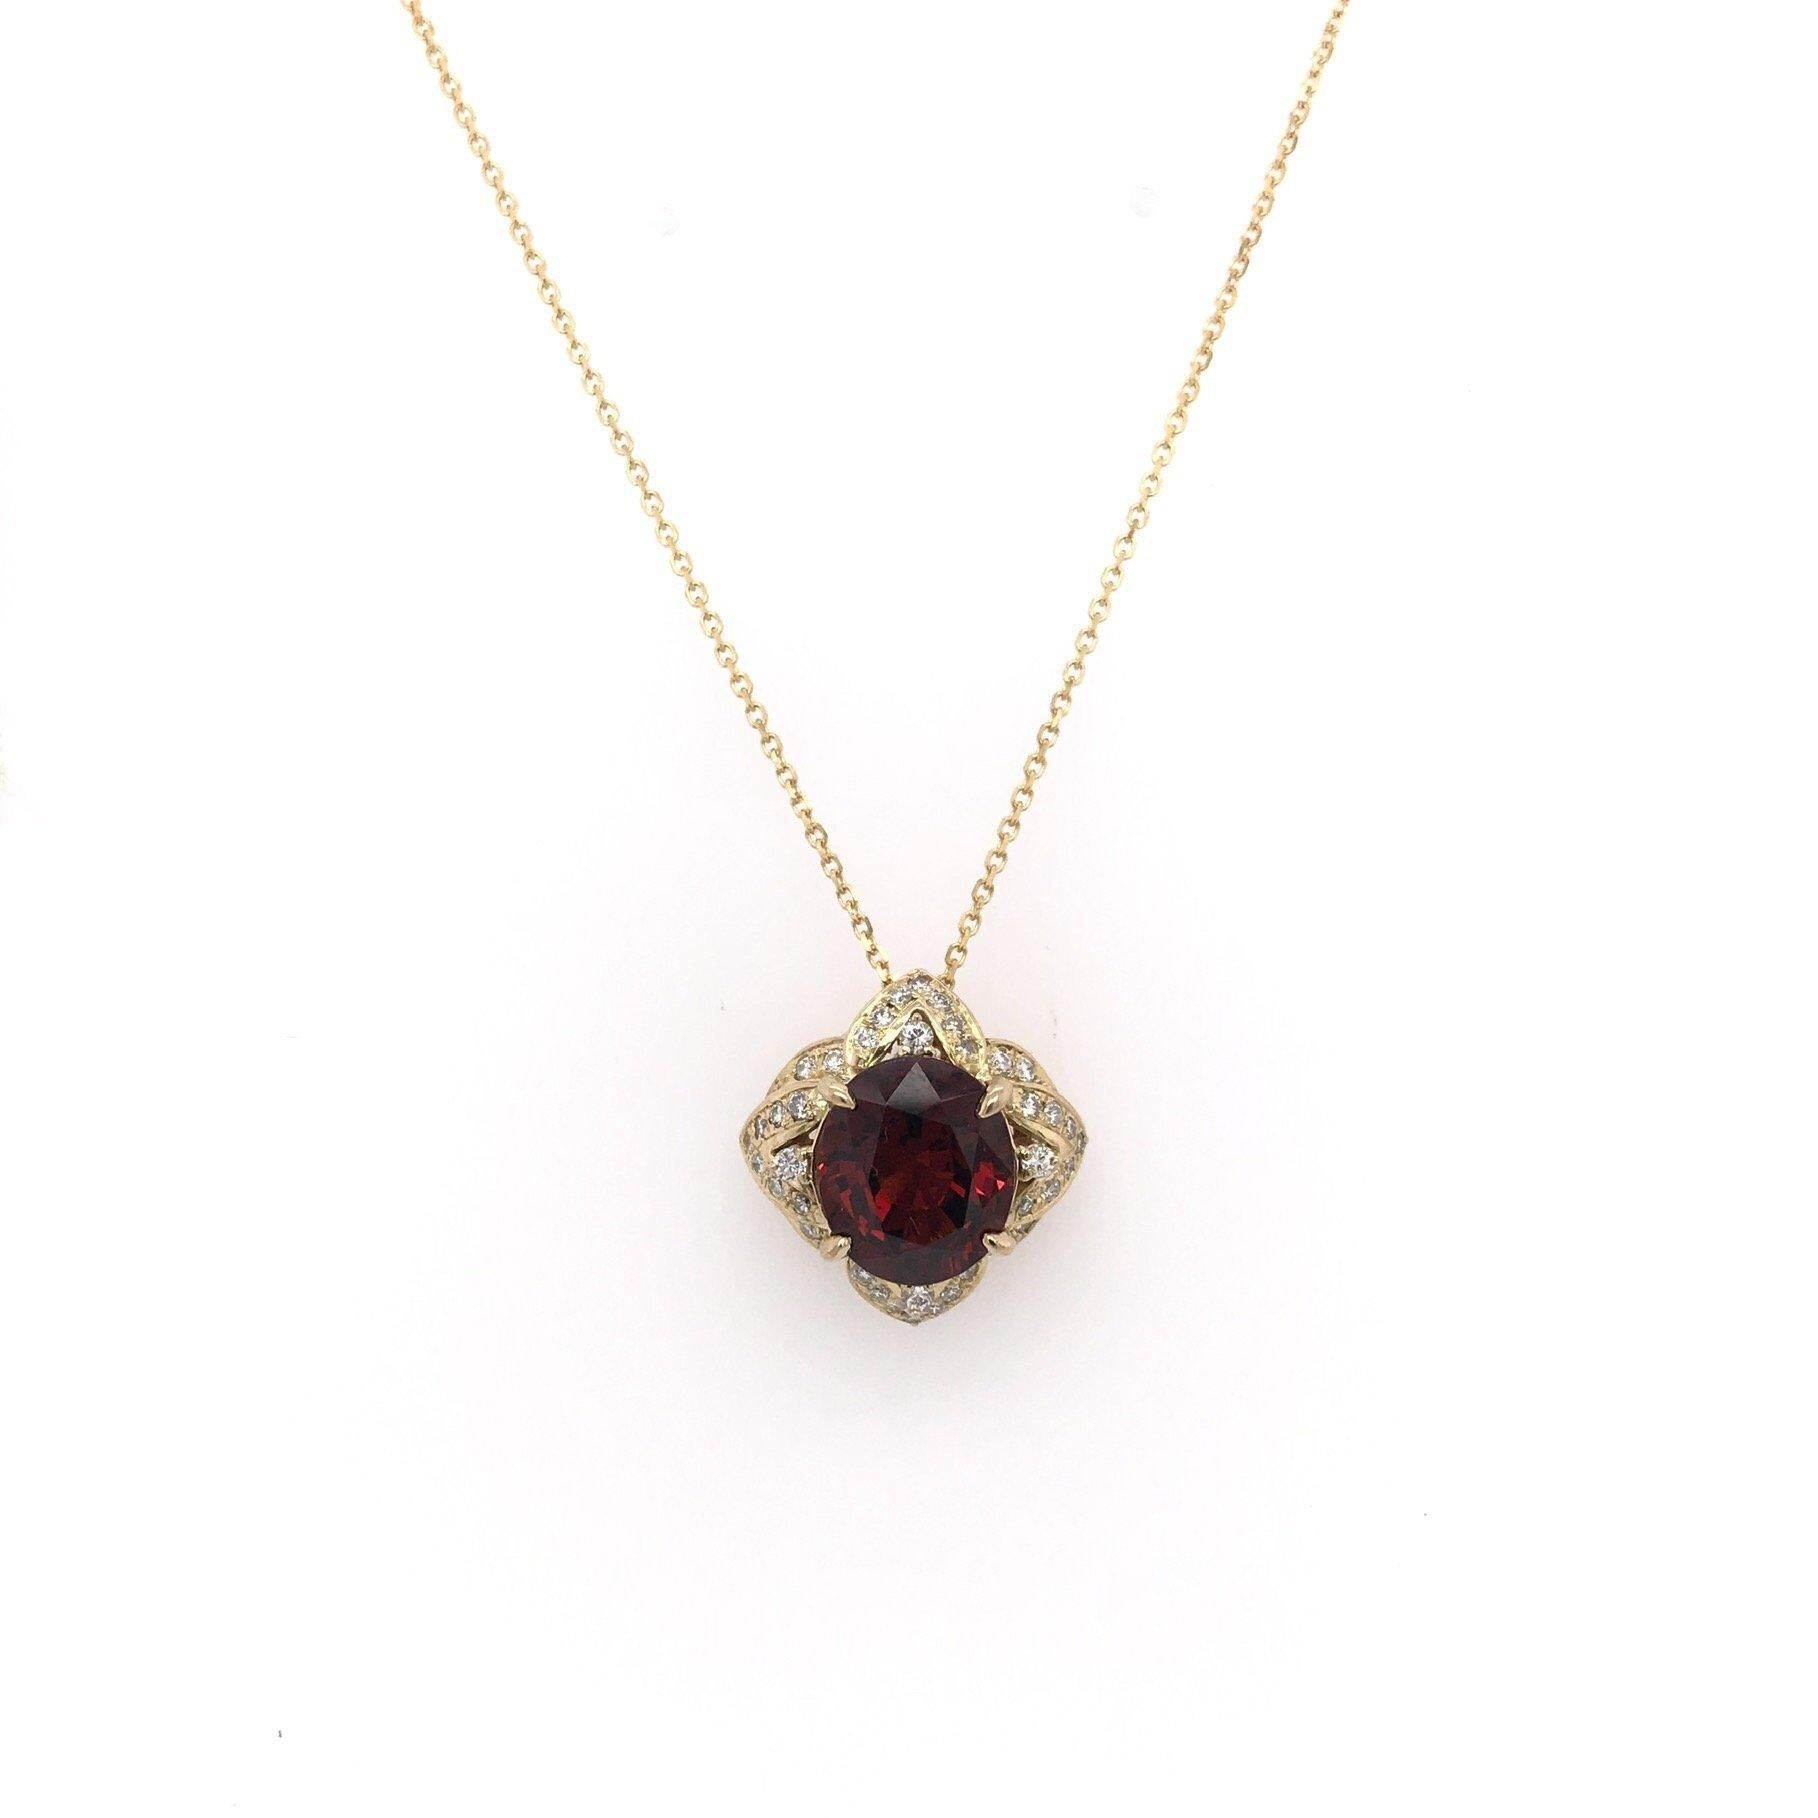 This garnet pendant is an estate piece. The central stone is a richly hued garnet. This particular garnet is the classic reddish brown hue most commonly associated with the stone. The center stone measures approximately 6 carats and is a fancy cut.